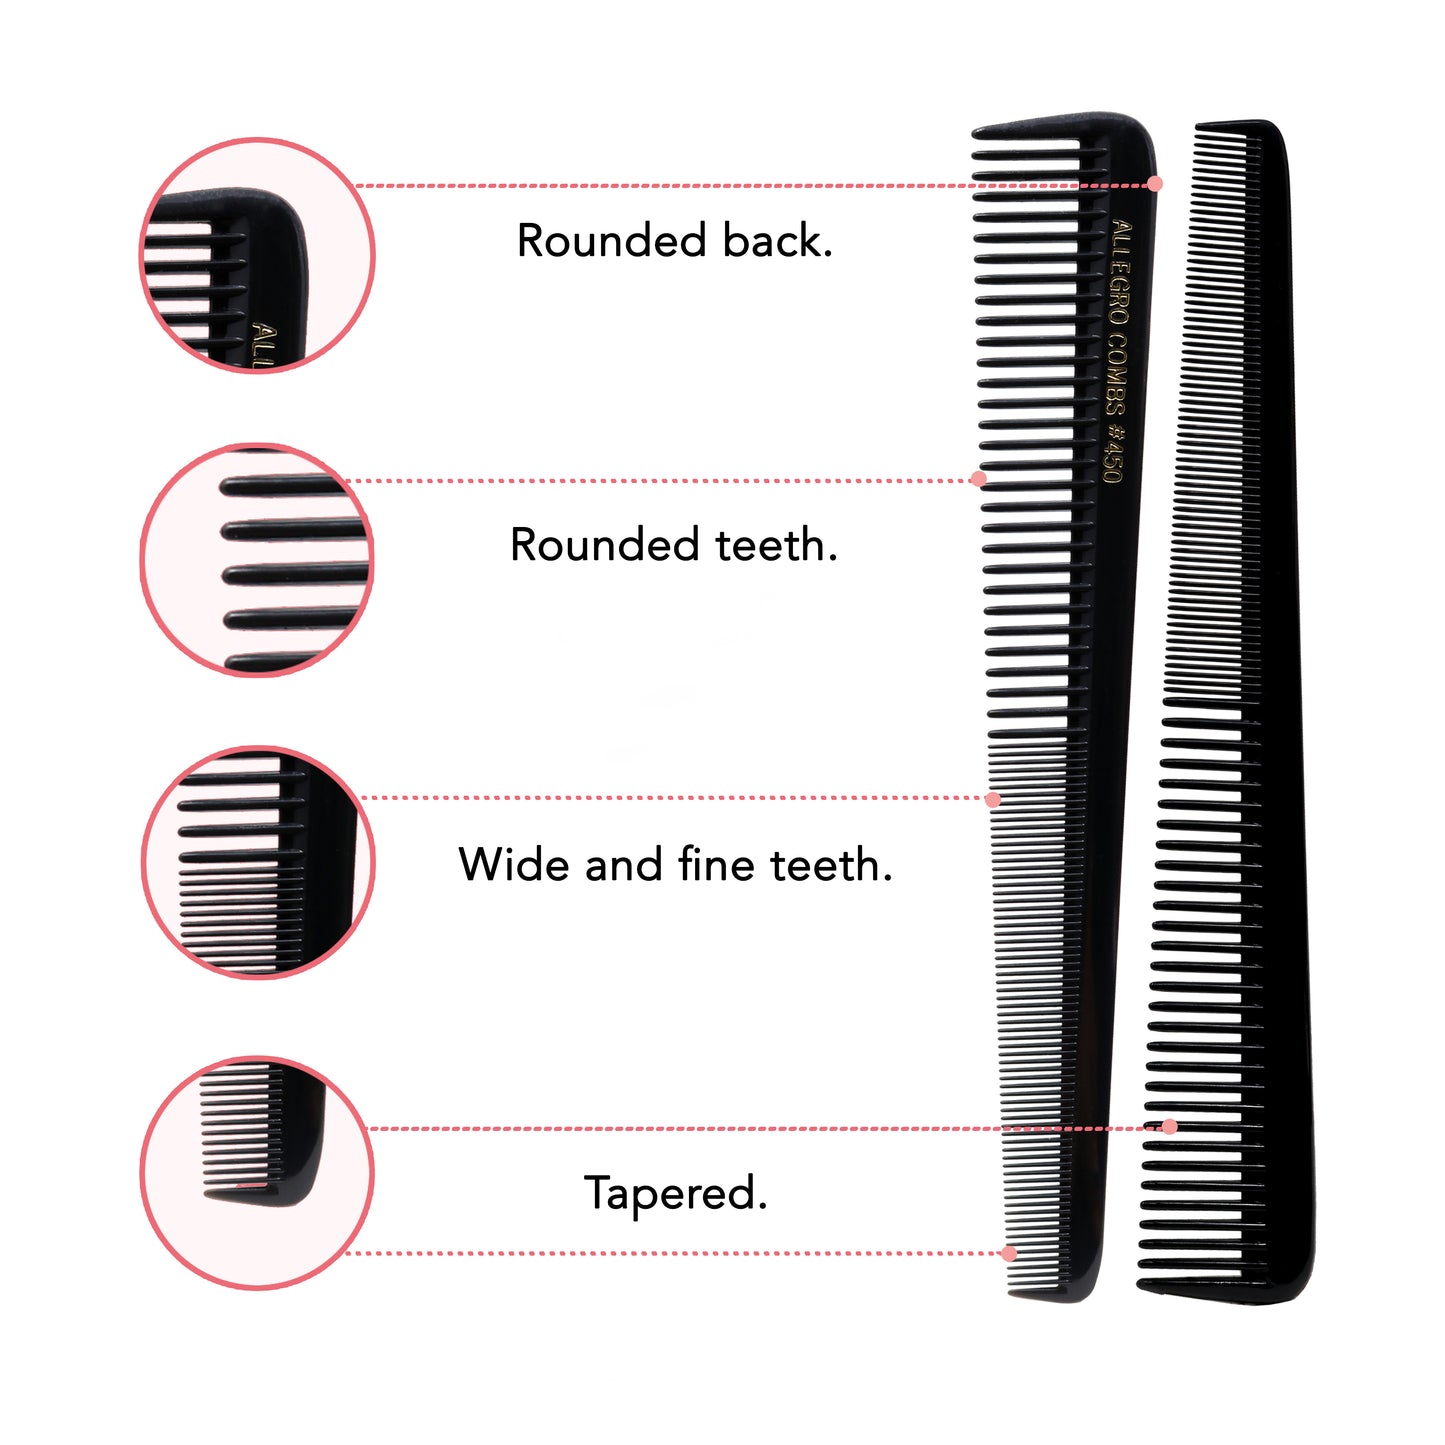 Allegro Combs 450 - Tapered Barber Hair Cutting Combs, Black, 12 Pack